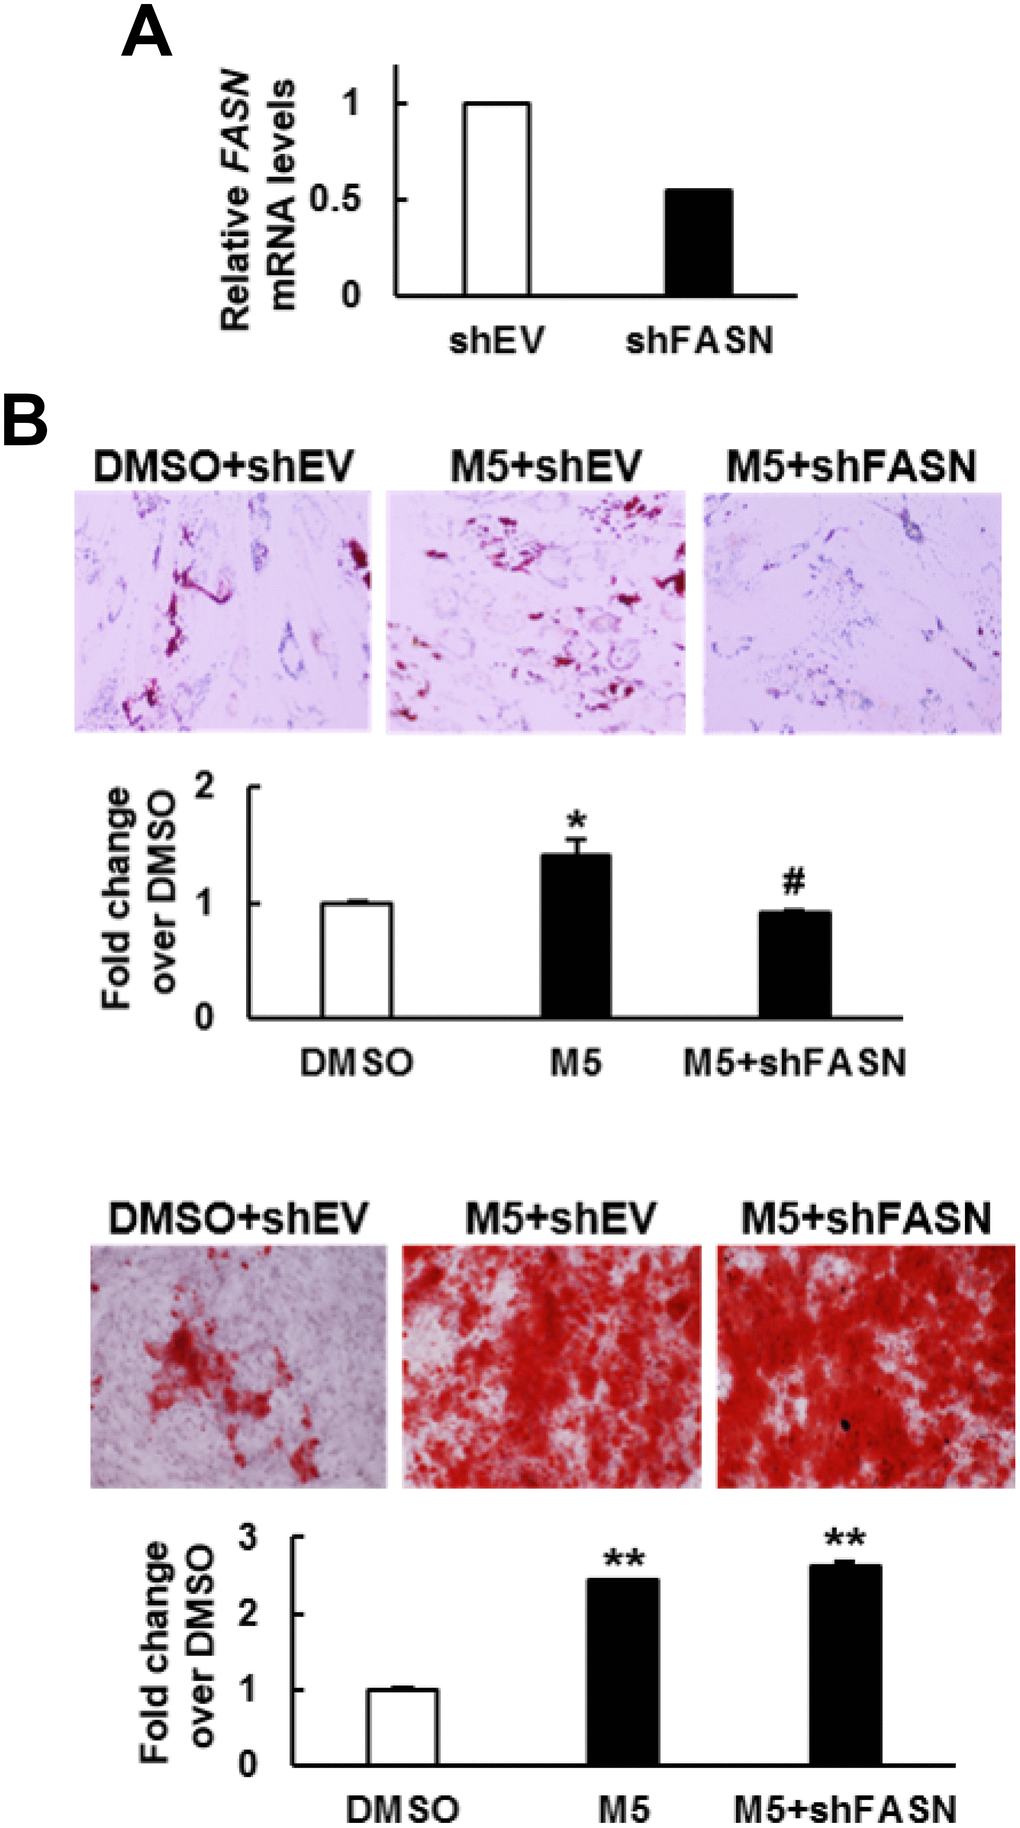 Effect of MCC-555 plus FASN knockdown on the adipogenic and osteoblastic differentiation of human bmMSCs. (A) RT-qPCR analyses showed the FASN mRNA levels of control (shEV) and FASN-knockdown (shFASN) cells. (B) Confluent shEV and shFASN cells were induced to undergo adipogenic (upper panel) and osteoblastic (lower panel) differentiation. The shEV cells were co-treated with either 5 μM MCC-555 or DMSO, whereas the shFASN cells were co-treated with 5 μM MCC-555. Cells were stained with Oil Red O at the 12th day, and with Alizarin Red S at the 14th day. Representative photos are shown. The stains were quantitated, and the signals of the MCC-555-treated cells were compared to that of the DMSO control cells (to which a value of 1 was assigned). *, P#, P=0.73; **, P